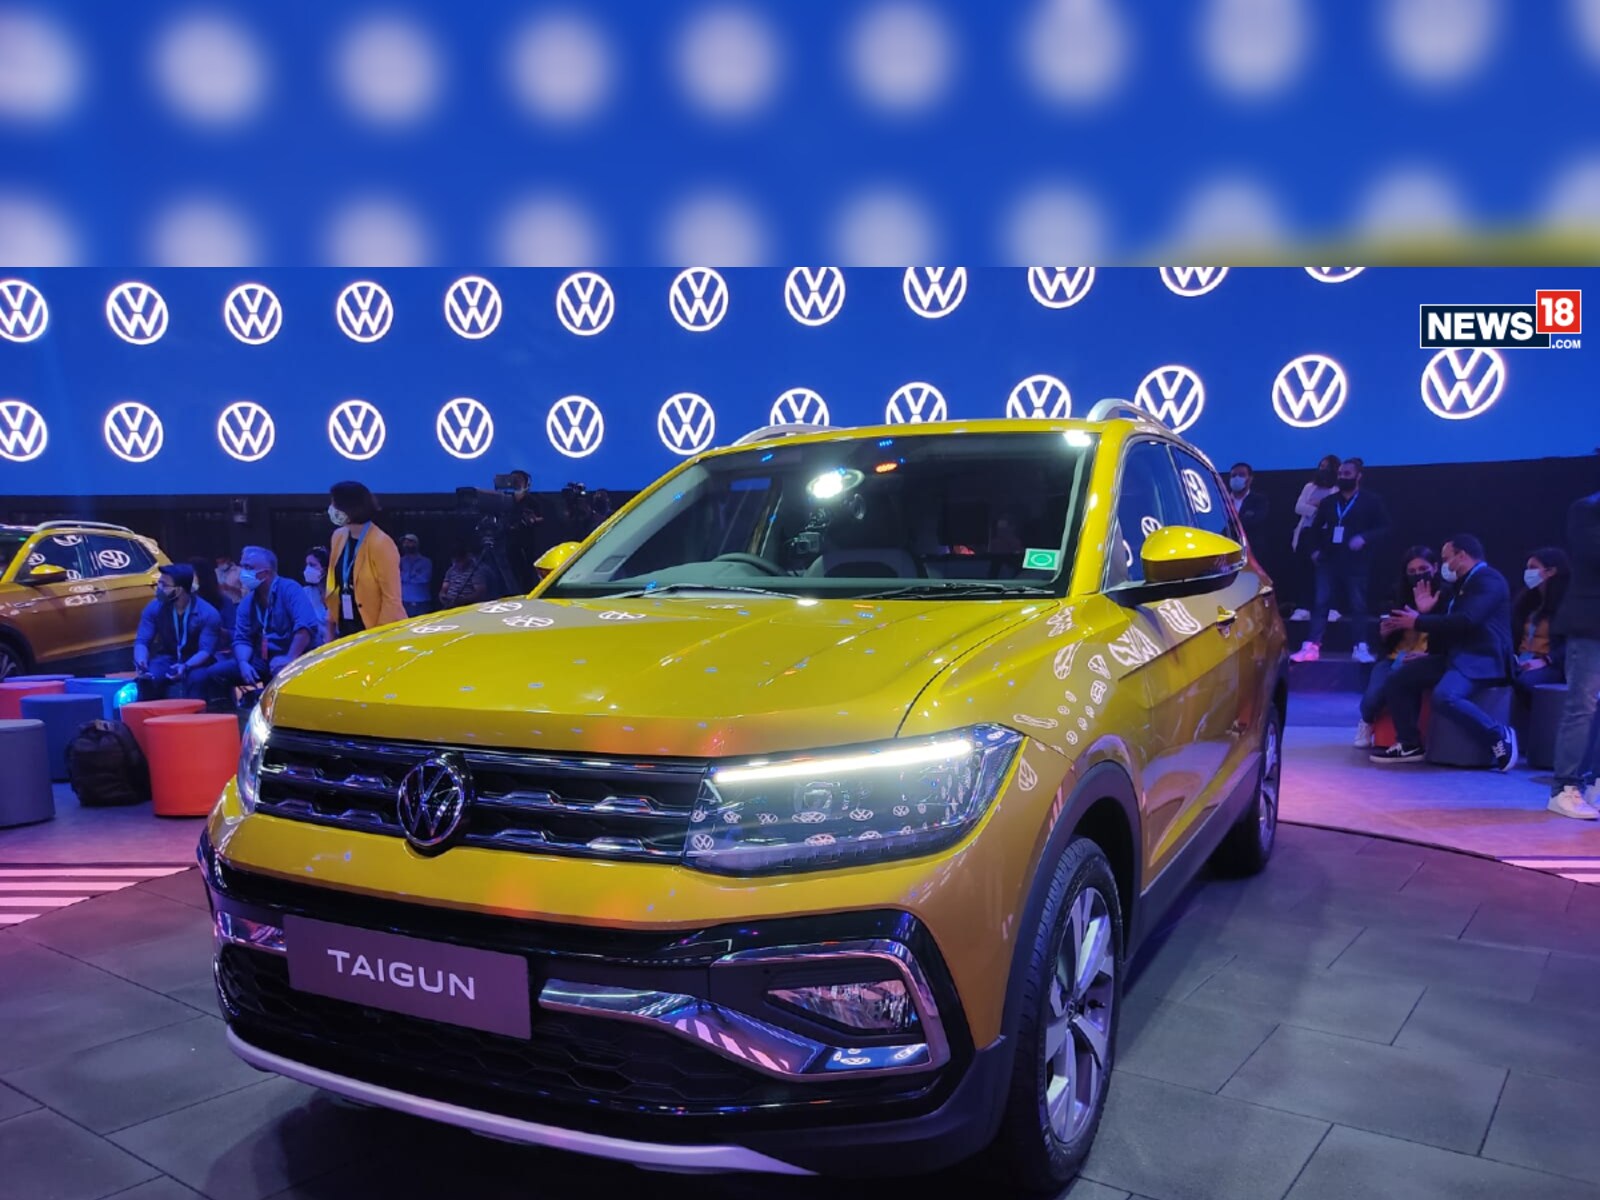 Vokswagen Taigun SUV Sold Out for 2021 in India, Crosses 18,000